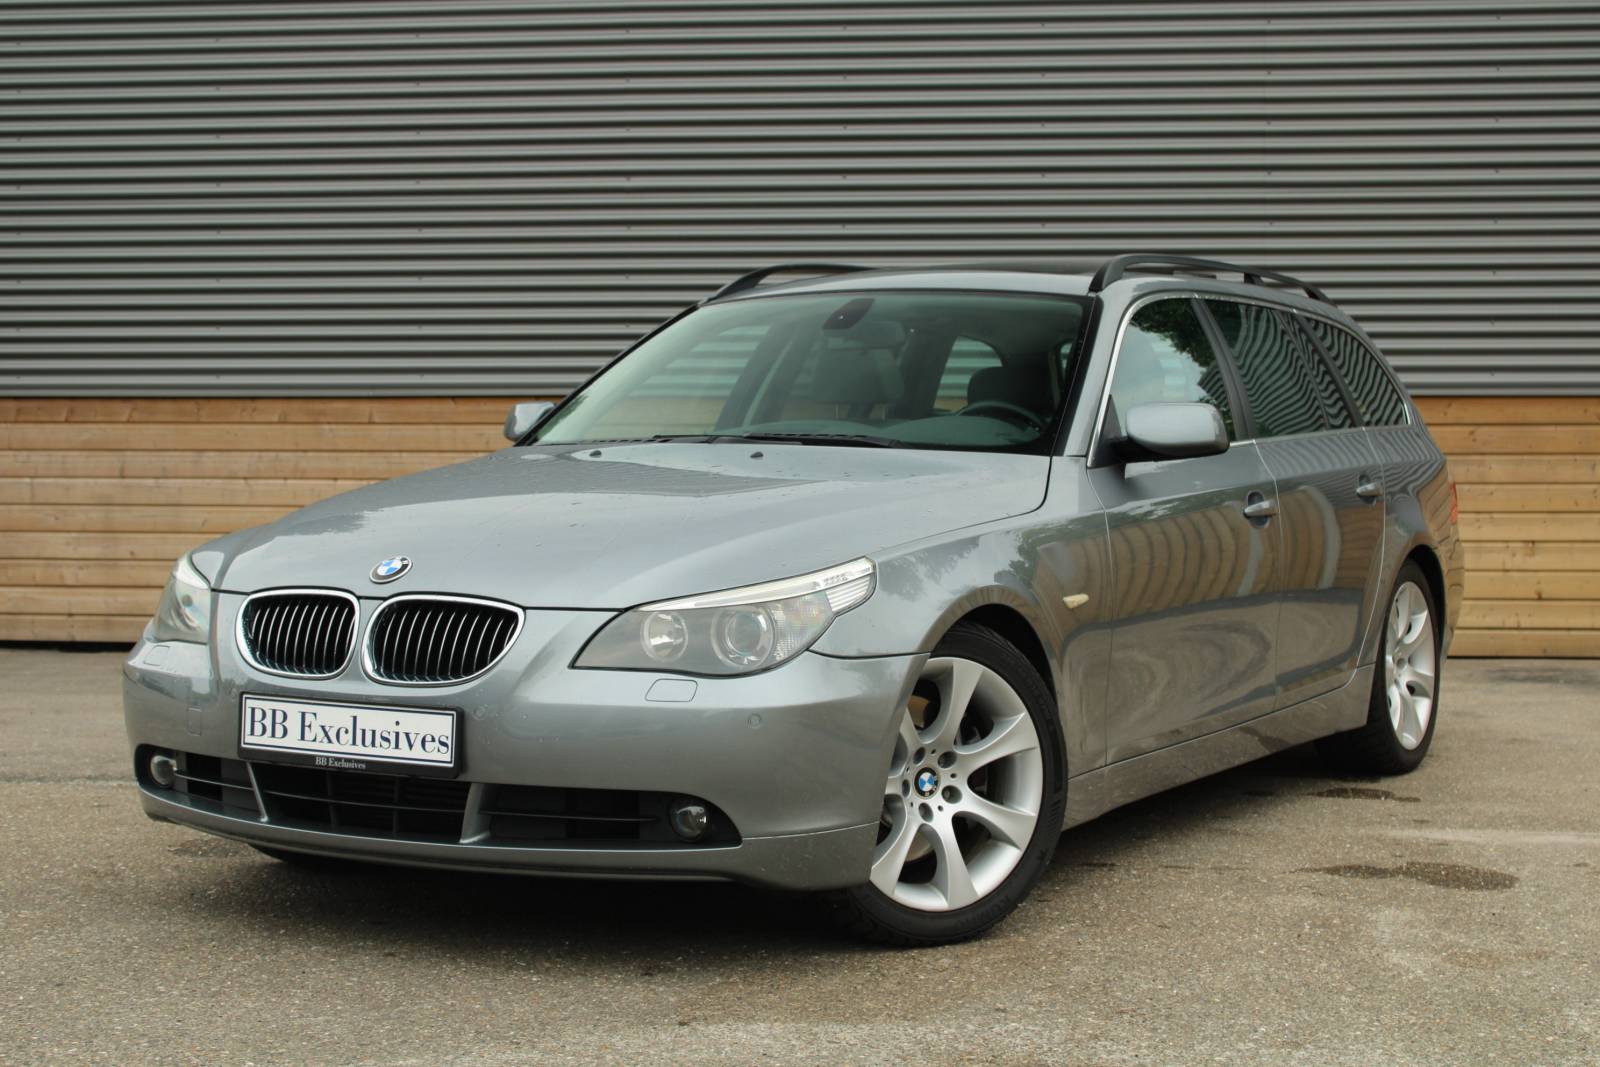 BB Exclusives | BMW 545i Touring